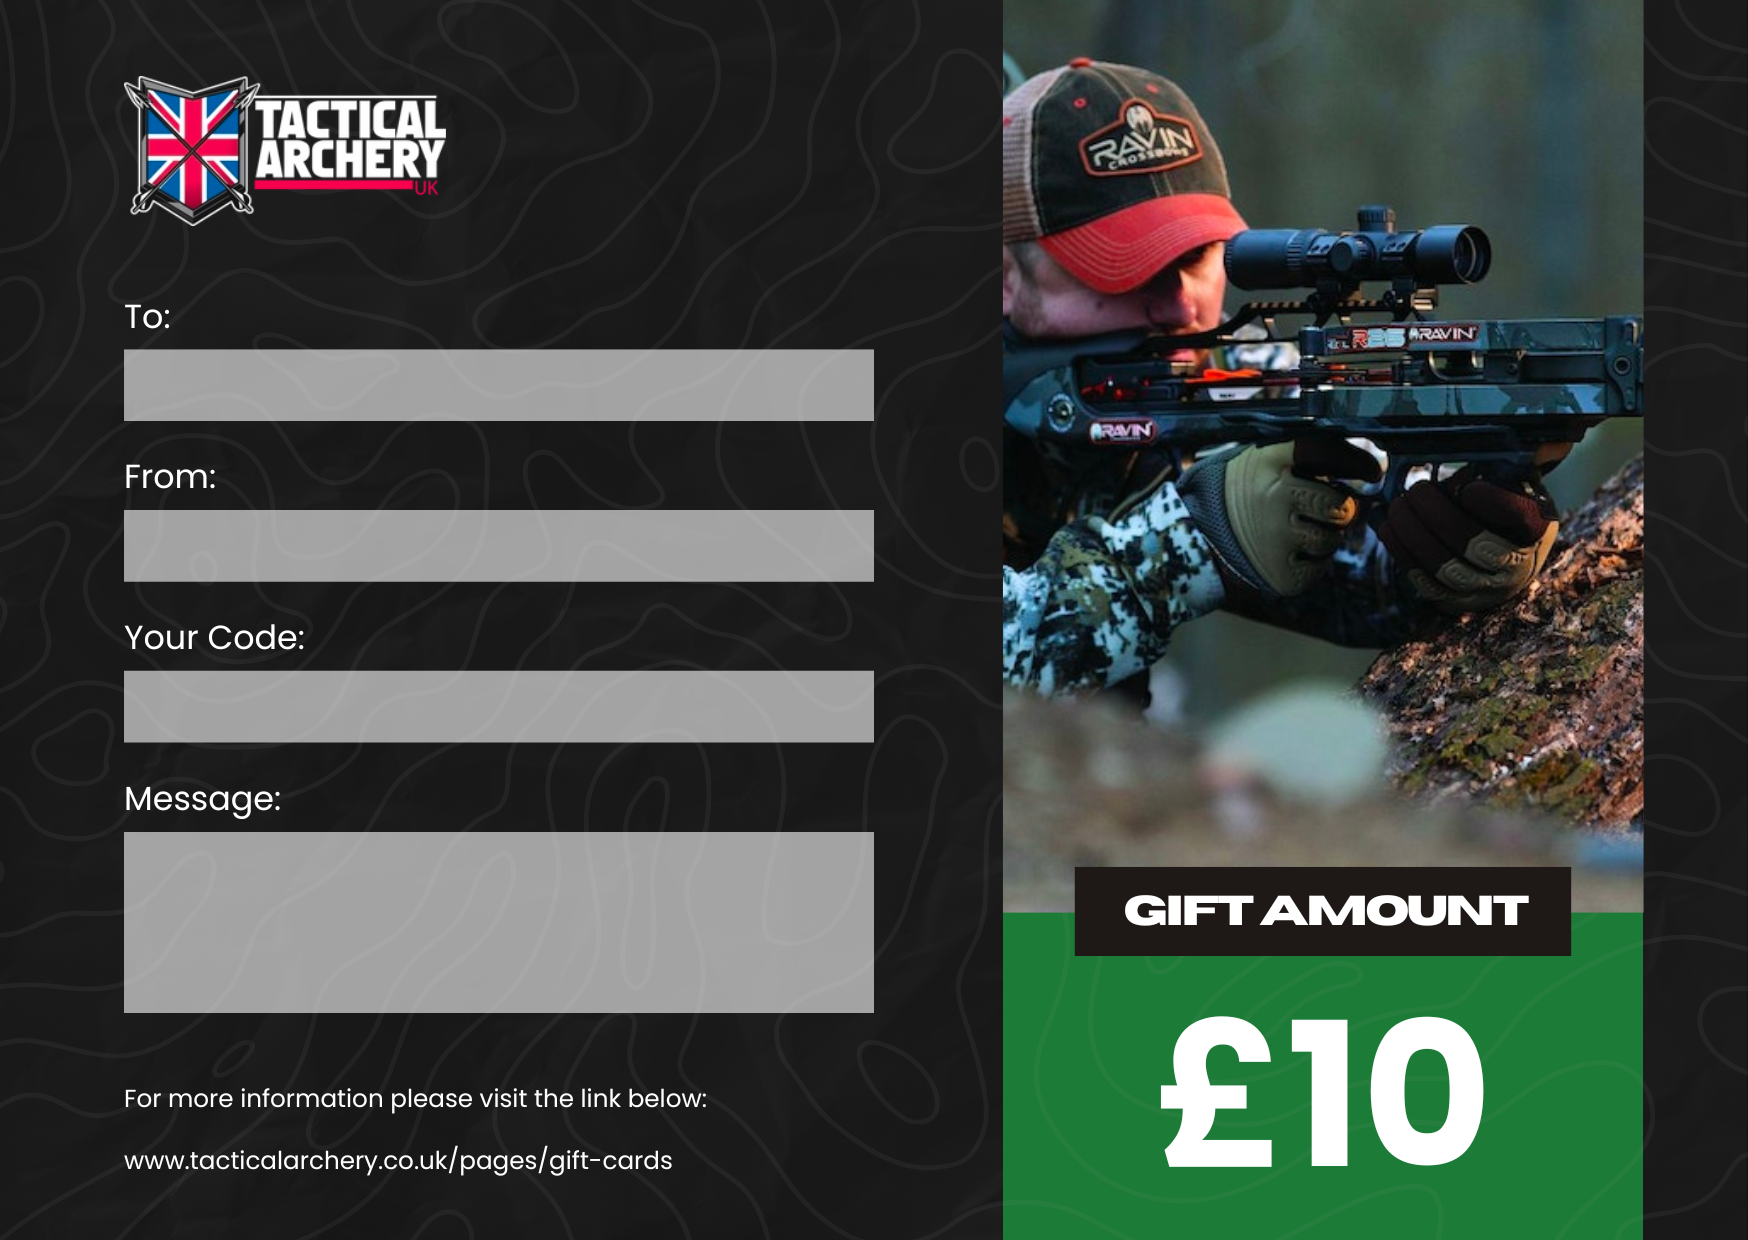 Tactical Archery UK Gift Card - £10